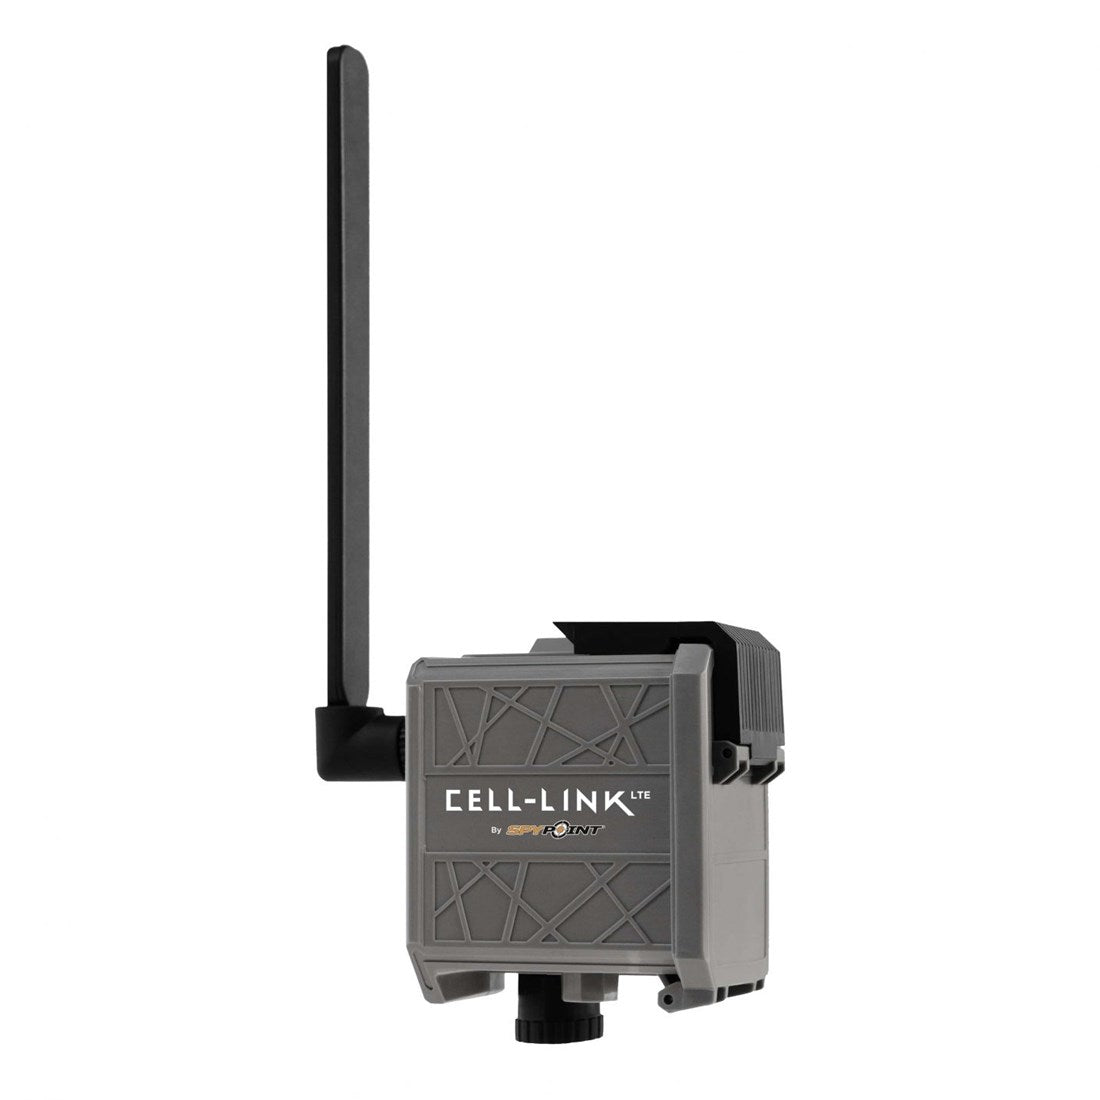 Product Image of Spypoint CELL-LINK cellular adaptor for trail cameras - enables remote viewing